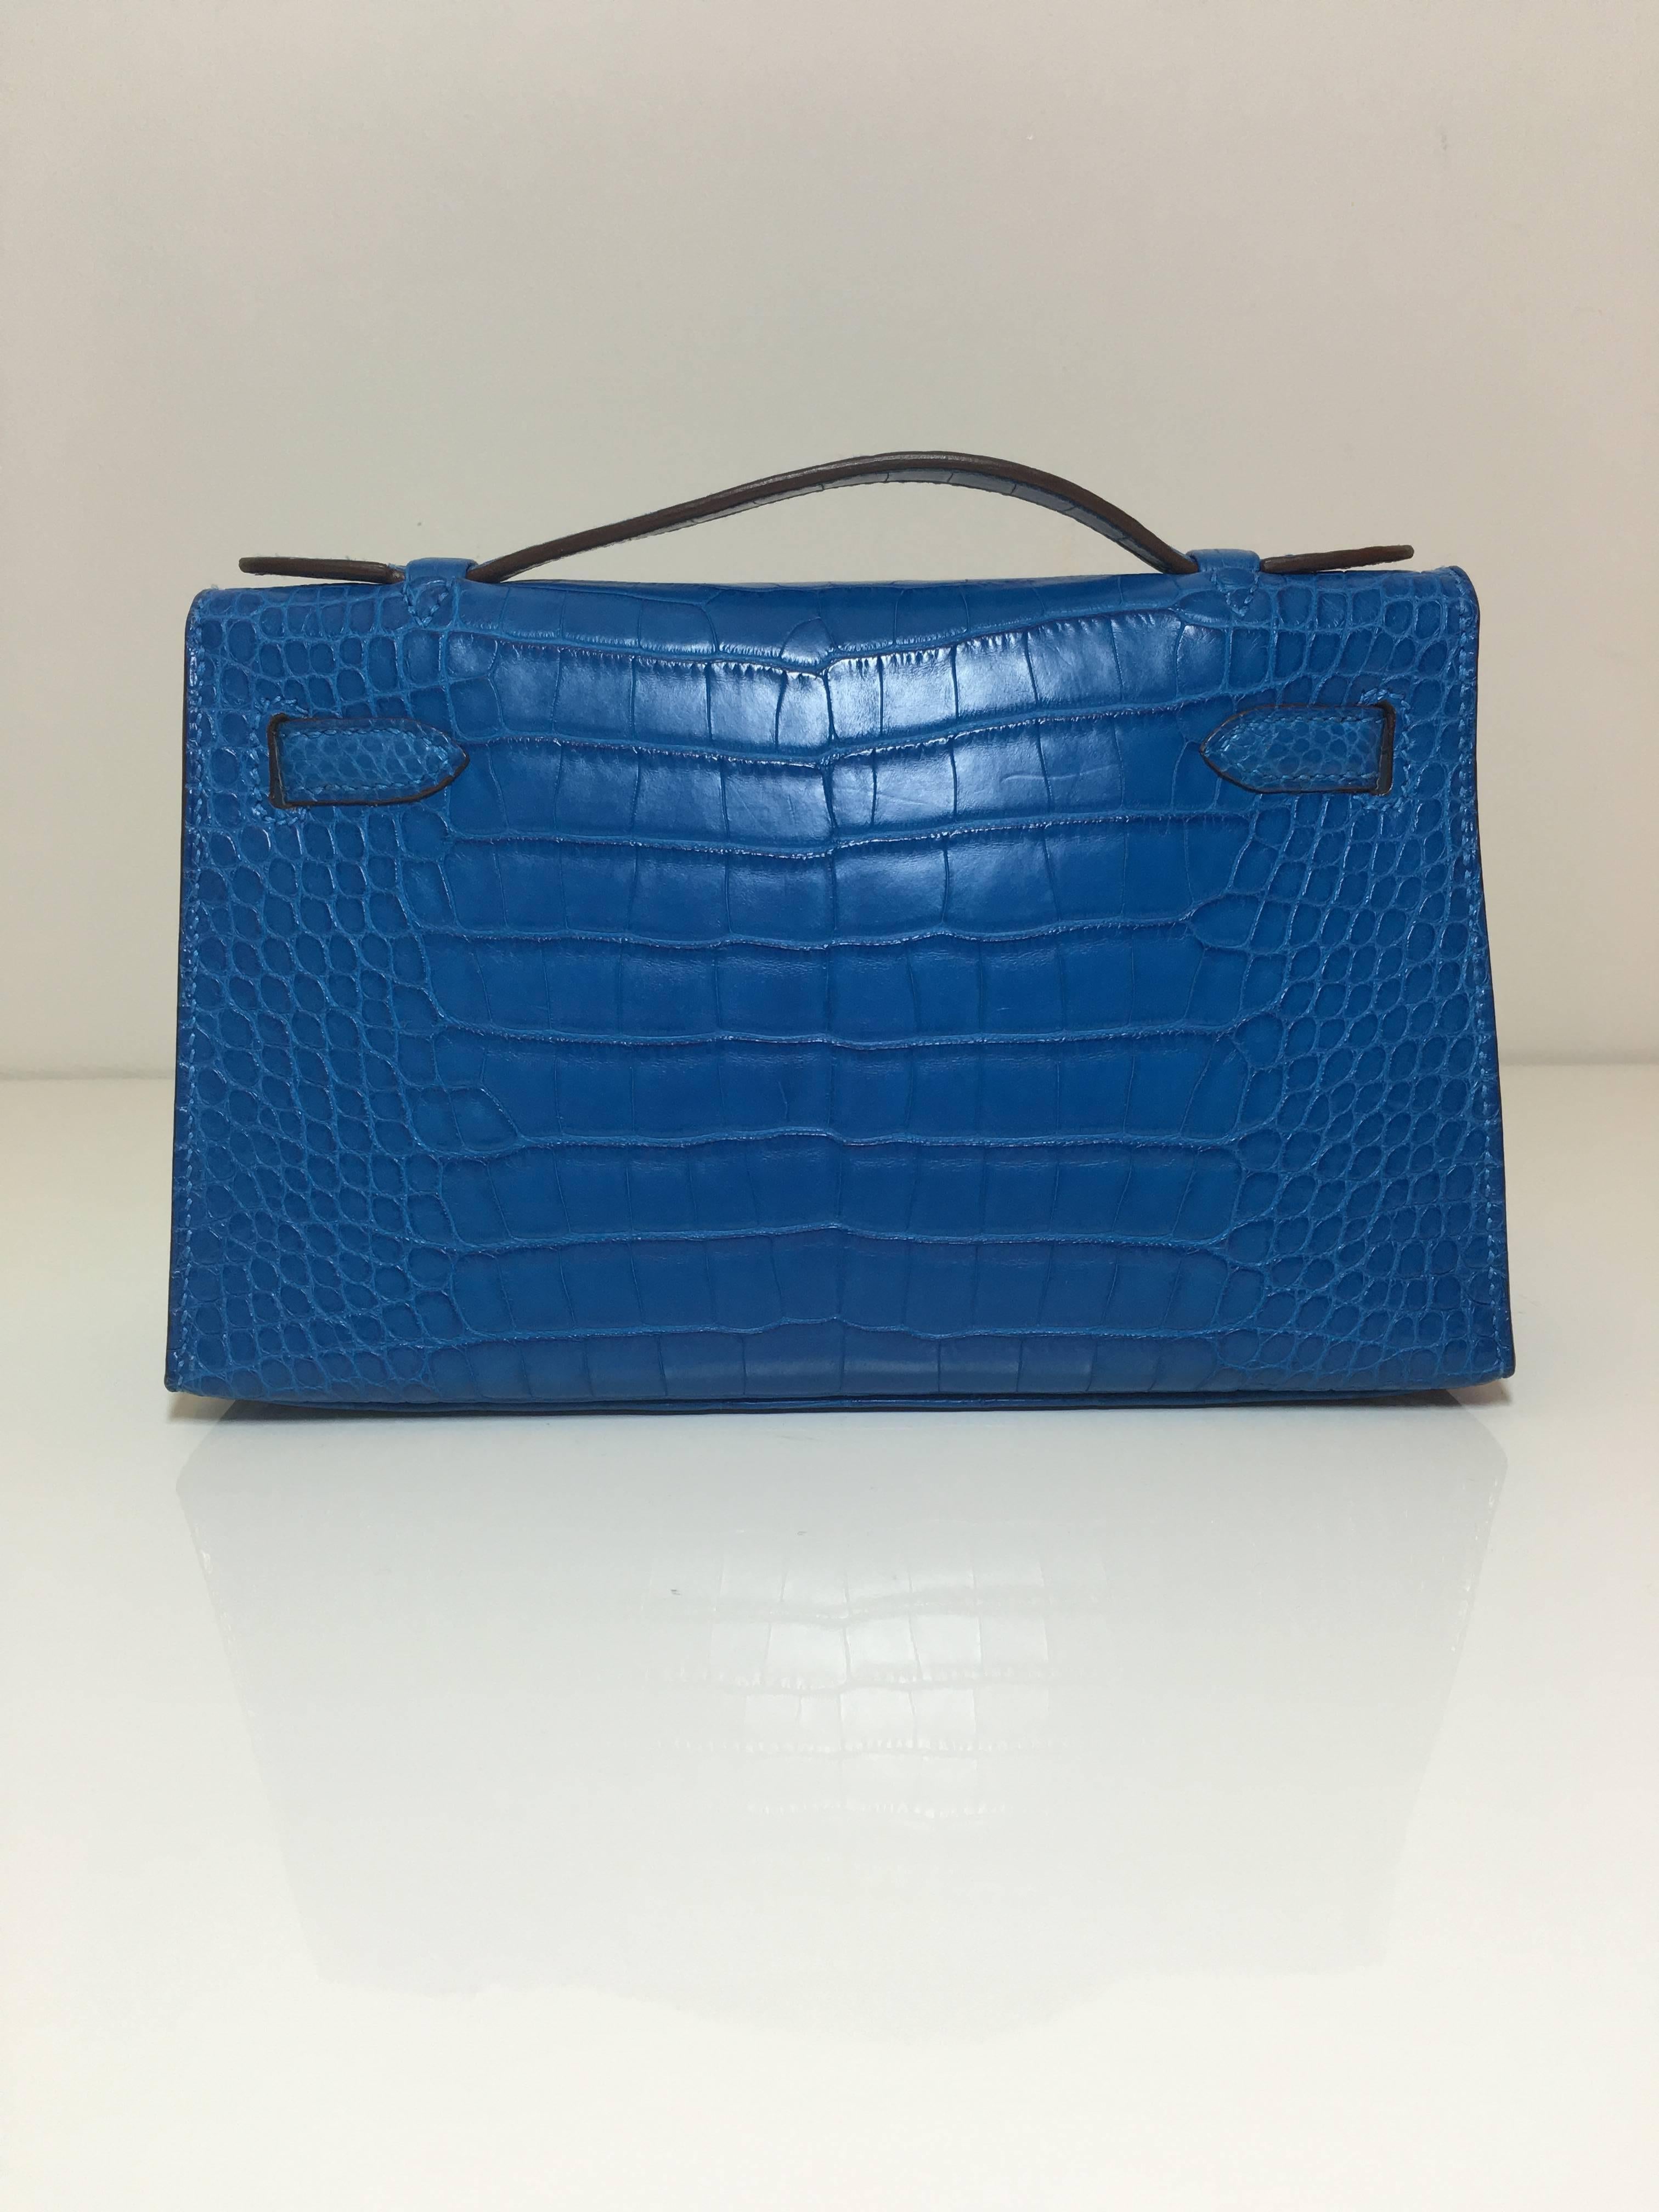 Rare Hermes Kelly Pochette
alligator matt
Colour  blue Mykonos
palladium hardware 
STORE FRESH, comes with receipt and full set (dust bag, box, cities...) 
Hydeparkfashion specializes in sourcing and delivering authentic luxury handbags, mainly